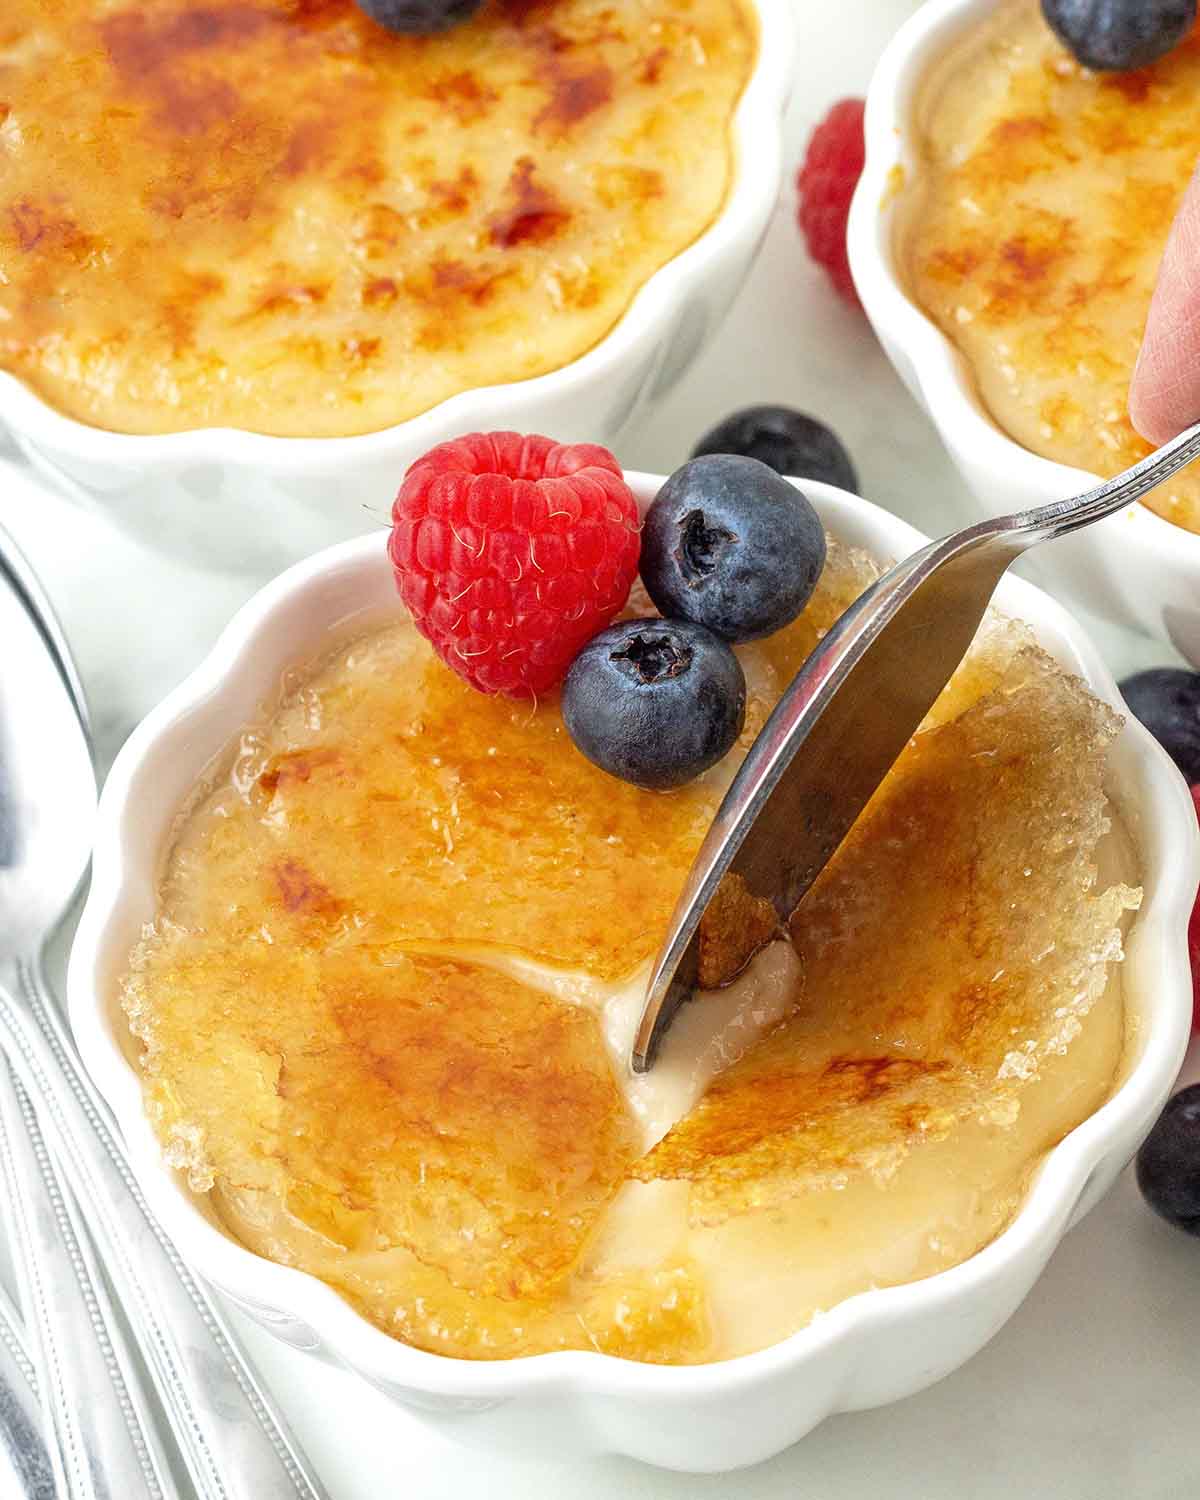 A close up shot of vegan crème brulee, a spoon is cracking the caramelized sugar shell.